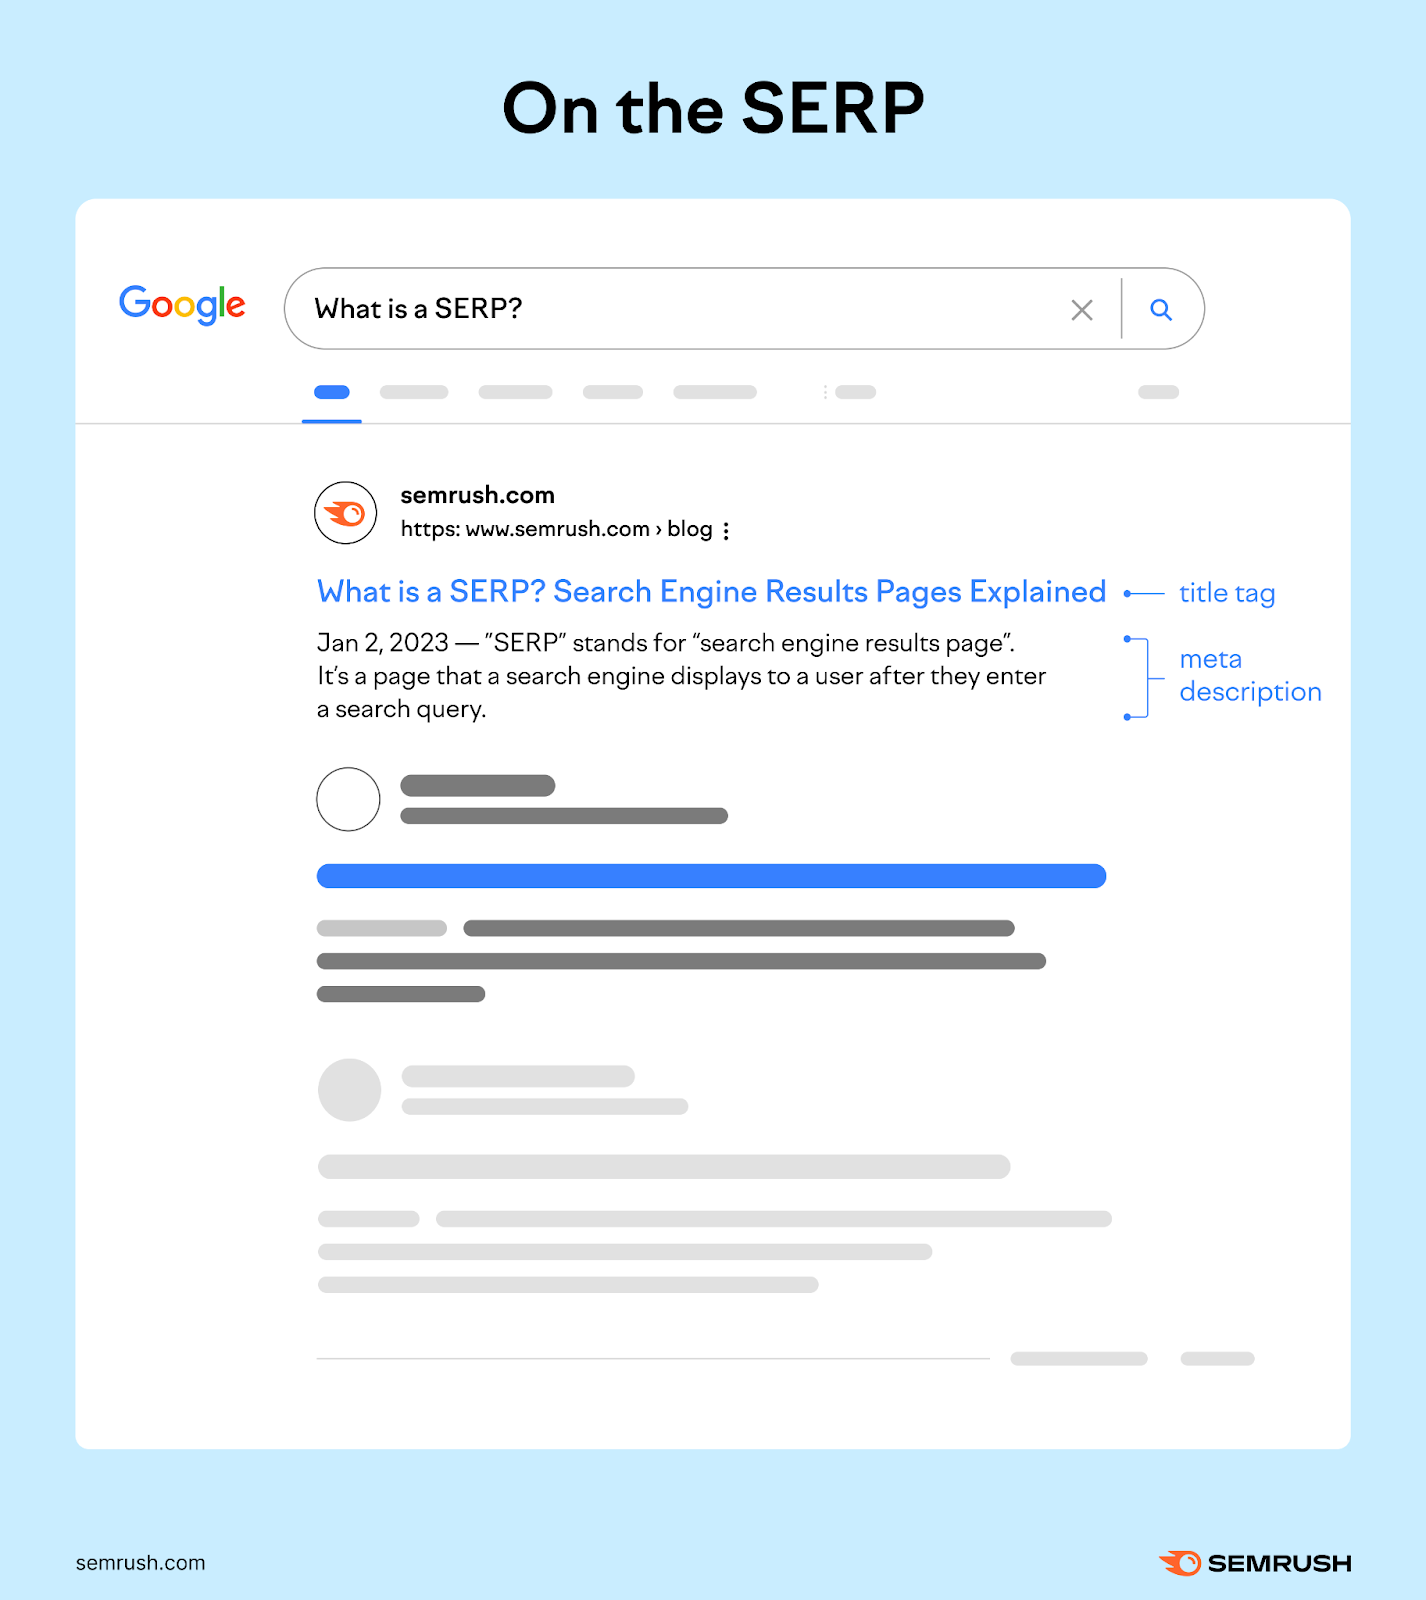 Illustration of a Google SERP on light blue background, showing a result for the query "What is a SERP?" with labels for the title tag and meta description.